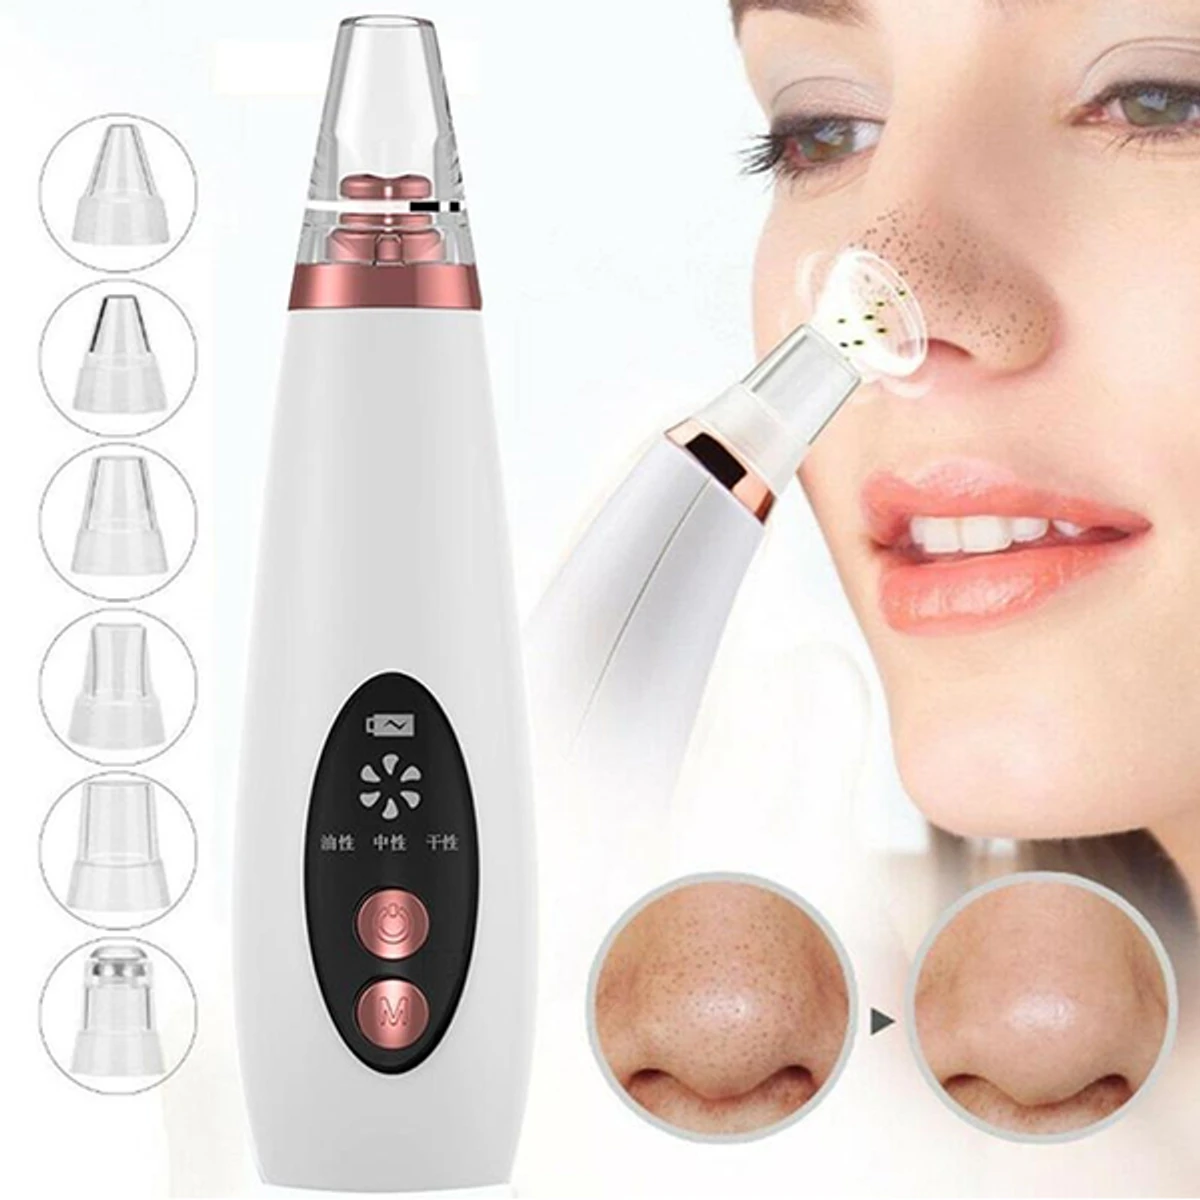 Official As Seen On TV Derma Suction Facial Pore Vacuum by  kit , Blackhead Extractor Cleans Pores Painlessly & Gently Without Squeezing - Canadian Edition